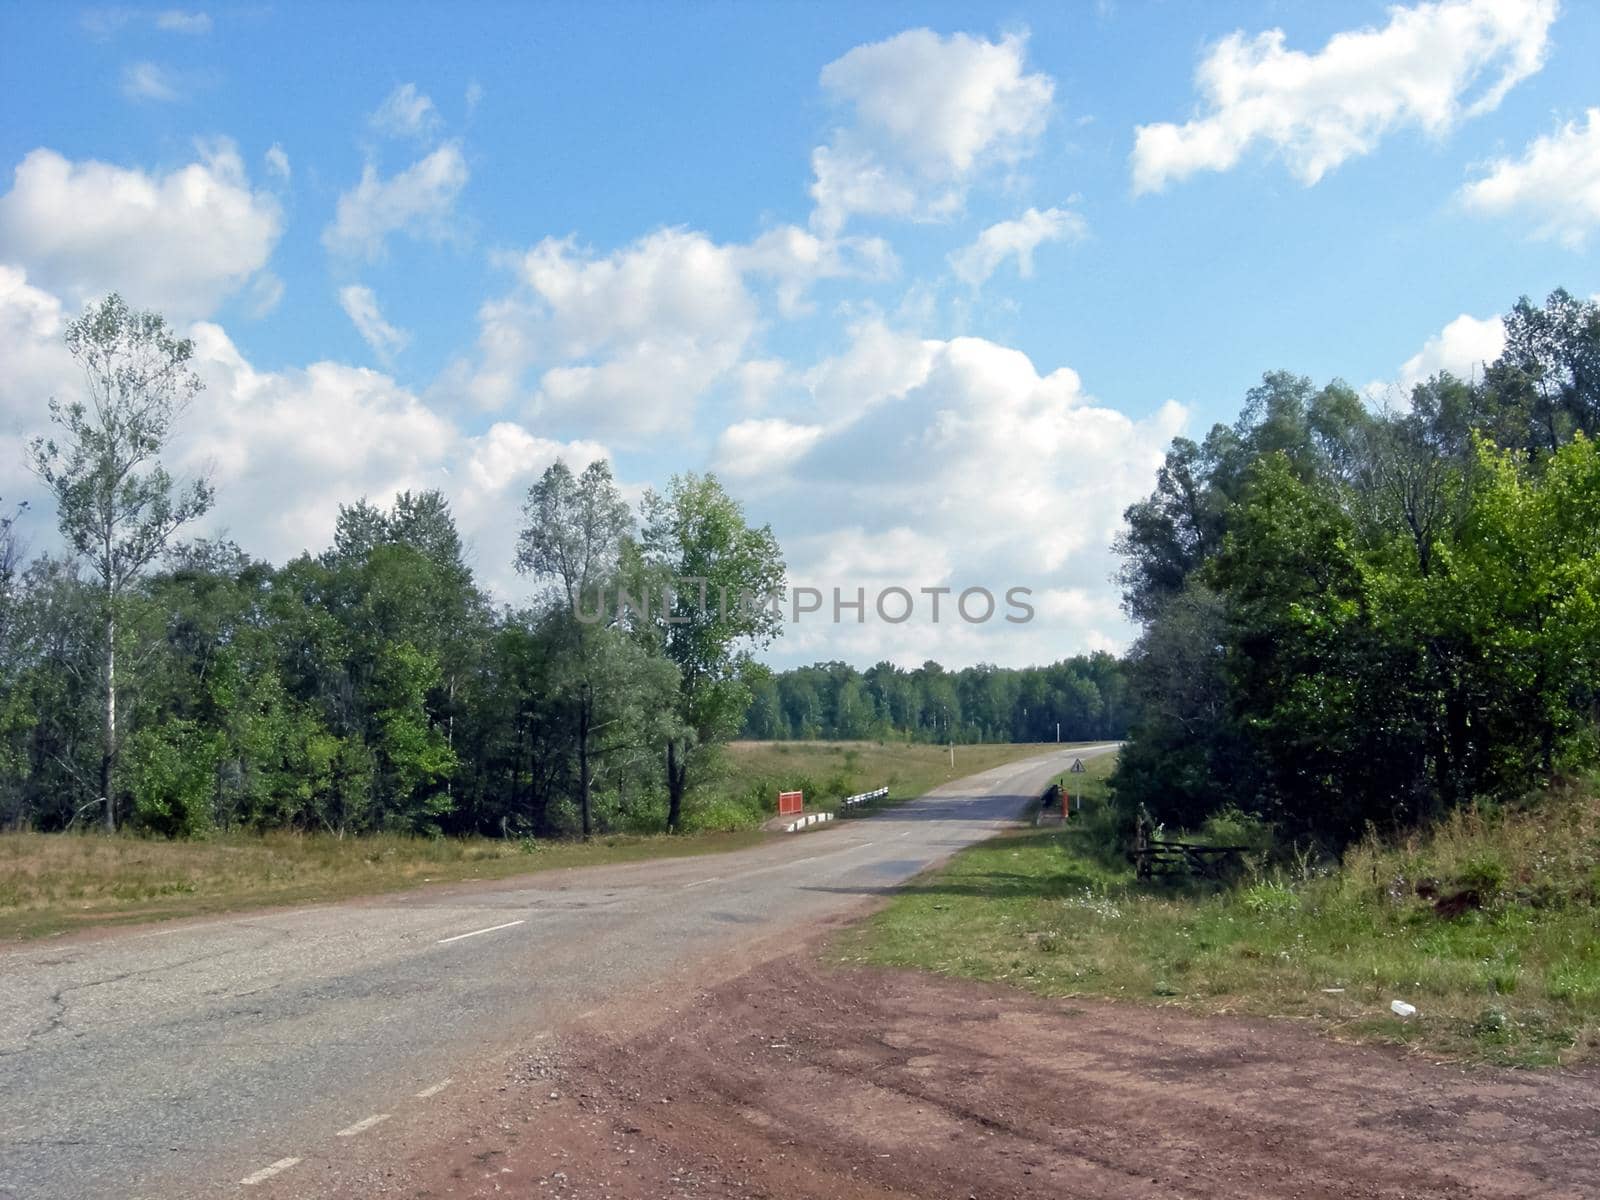 Beloretsky tract. Nature is in the way of the Beloretsky tract. Roads and landscape. by DePo